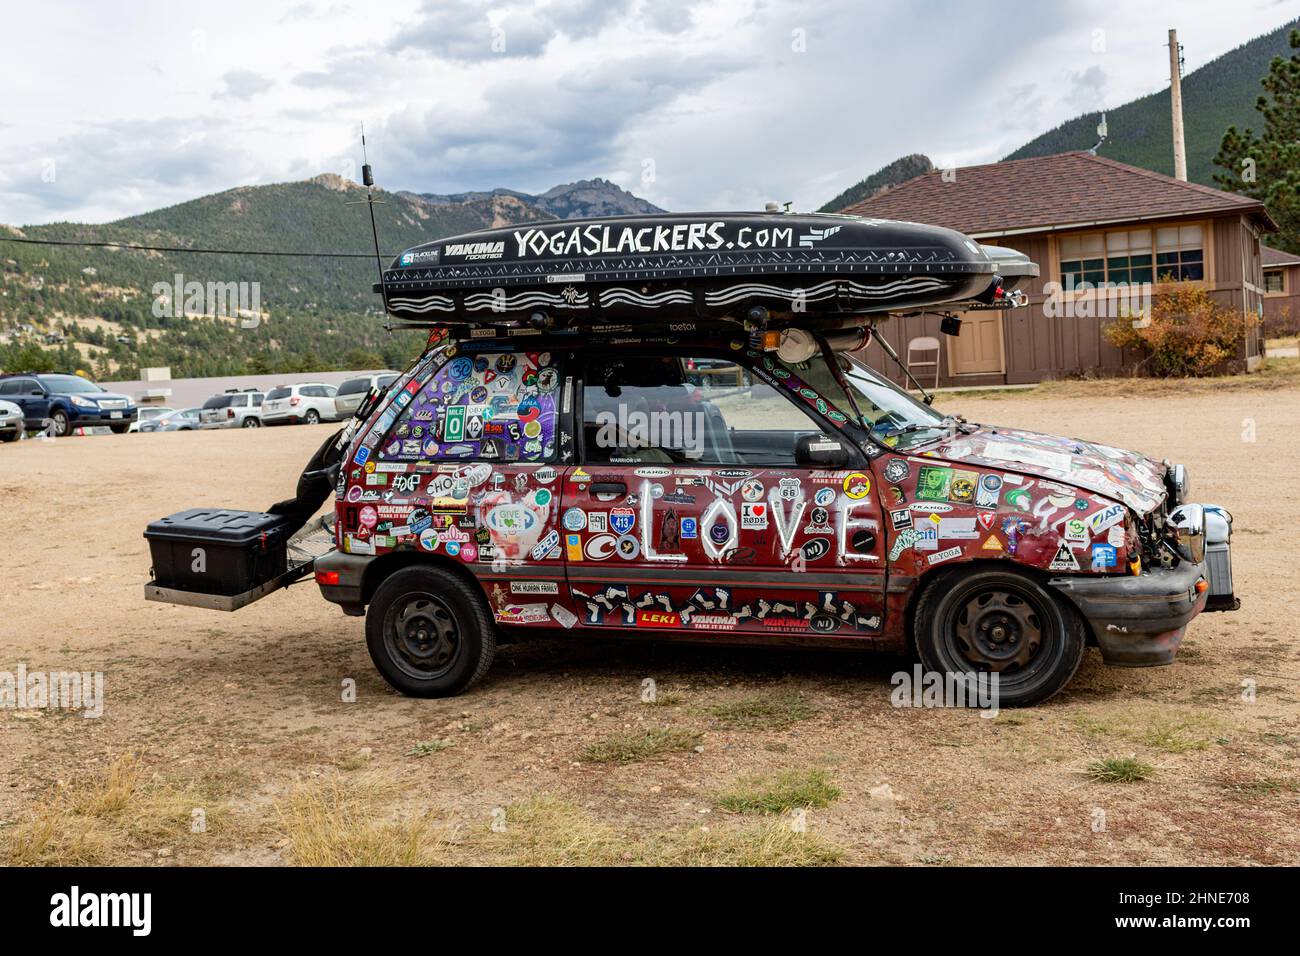 The Peace Love Car, a 1988 Ford Festiva covered with decals, transportation and home to two traveling yoga teachers. Stock Photo